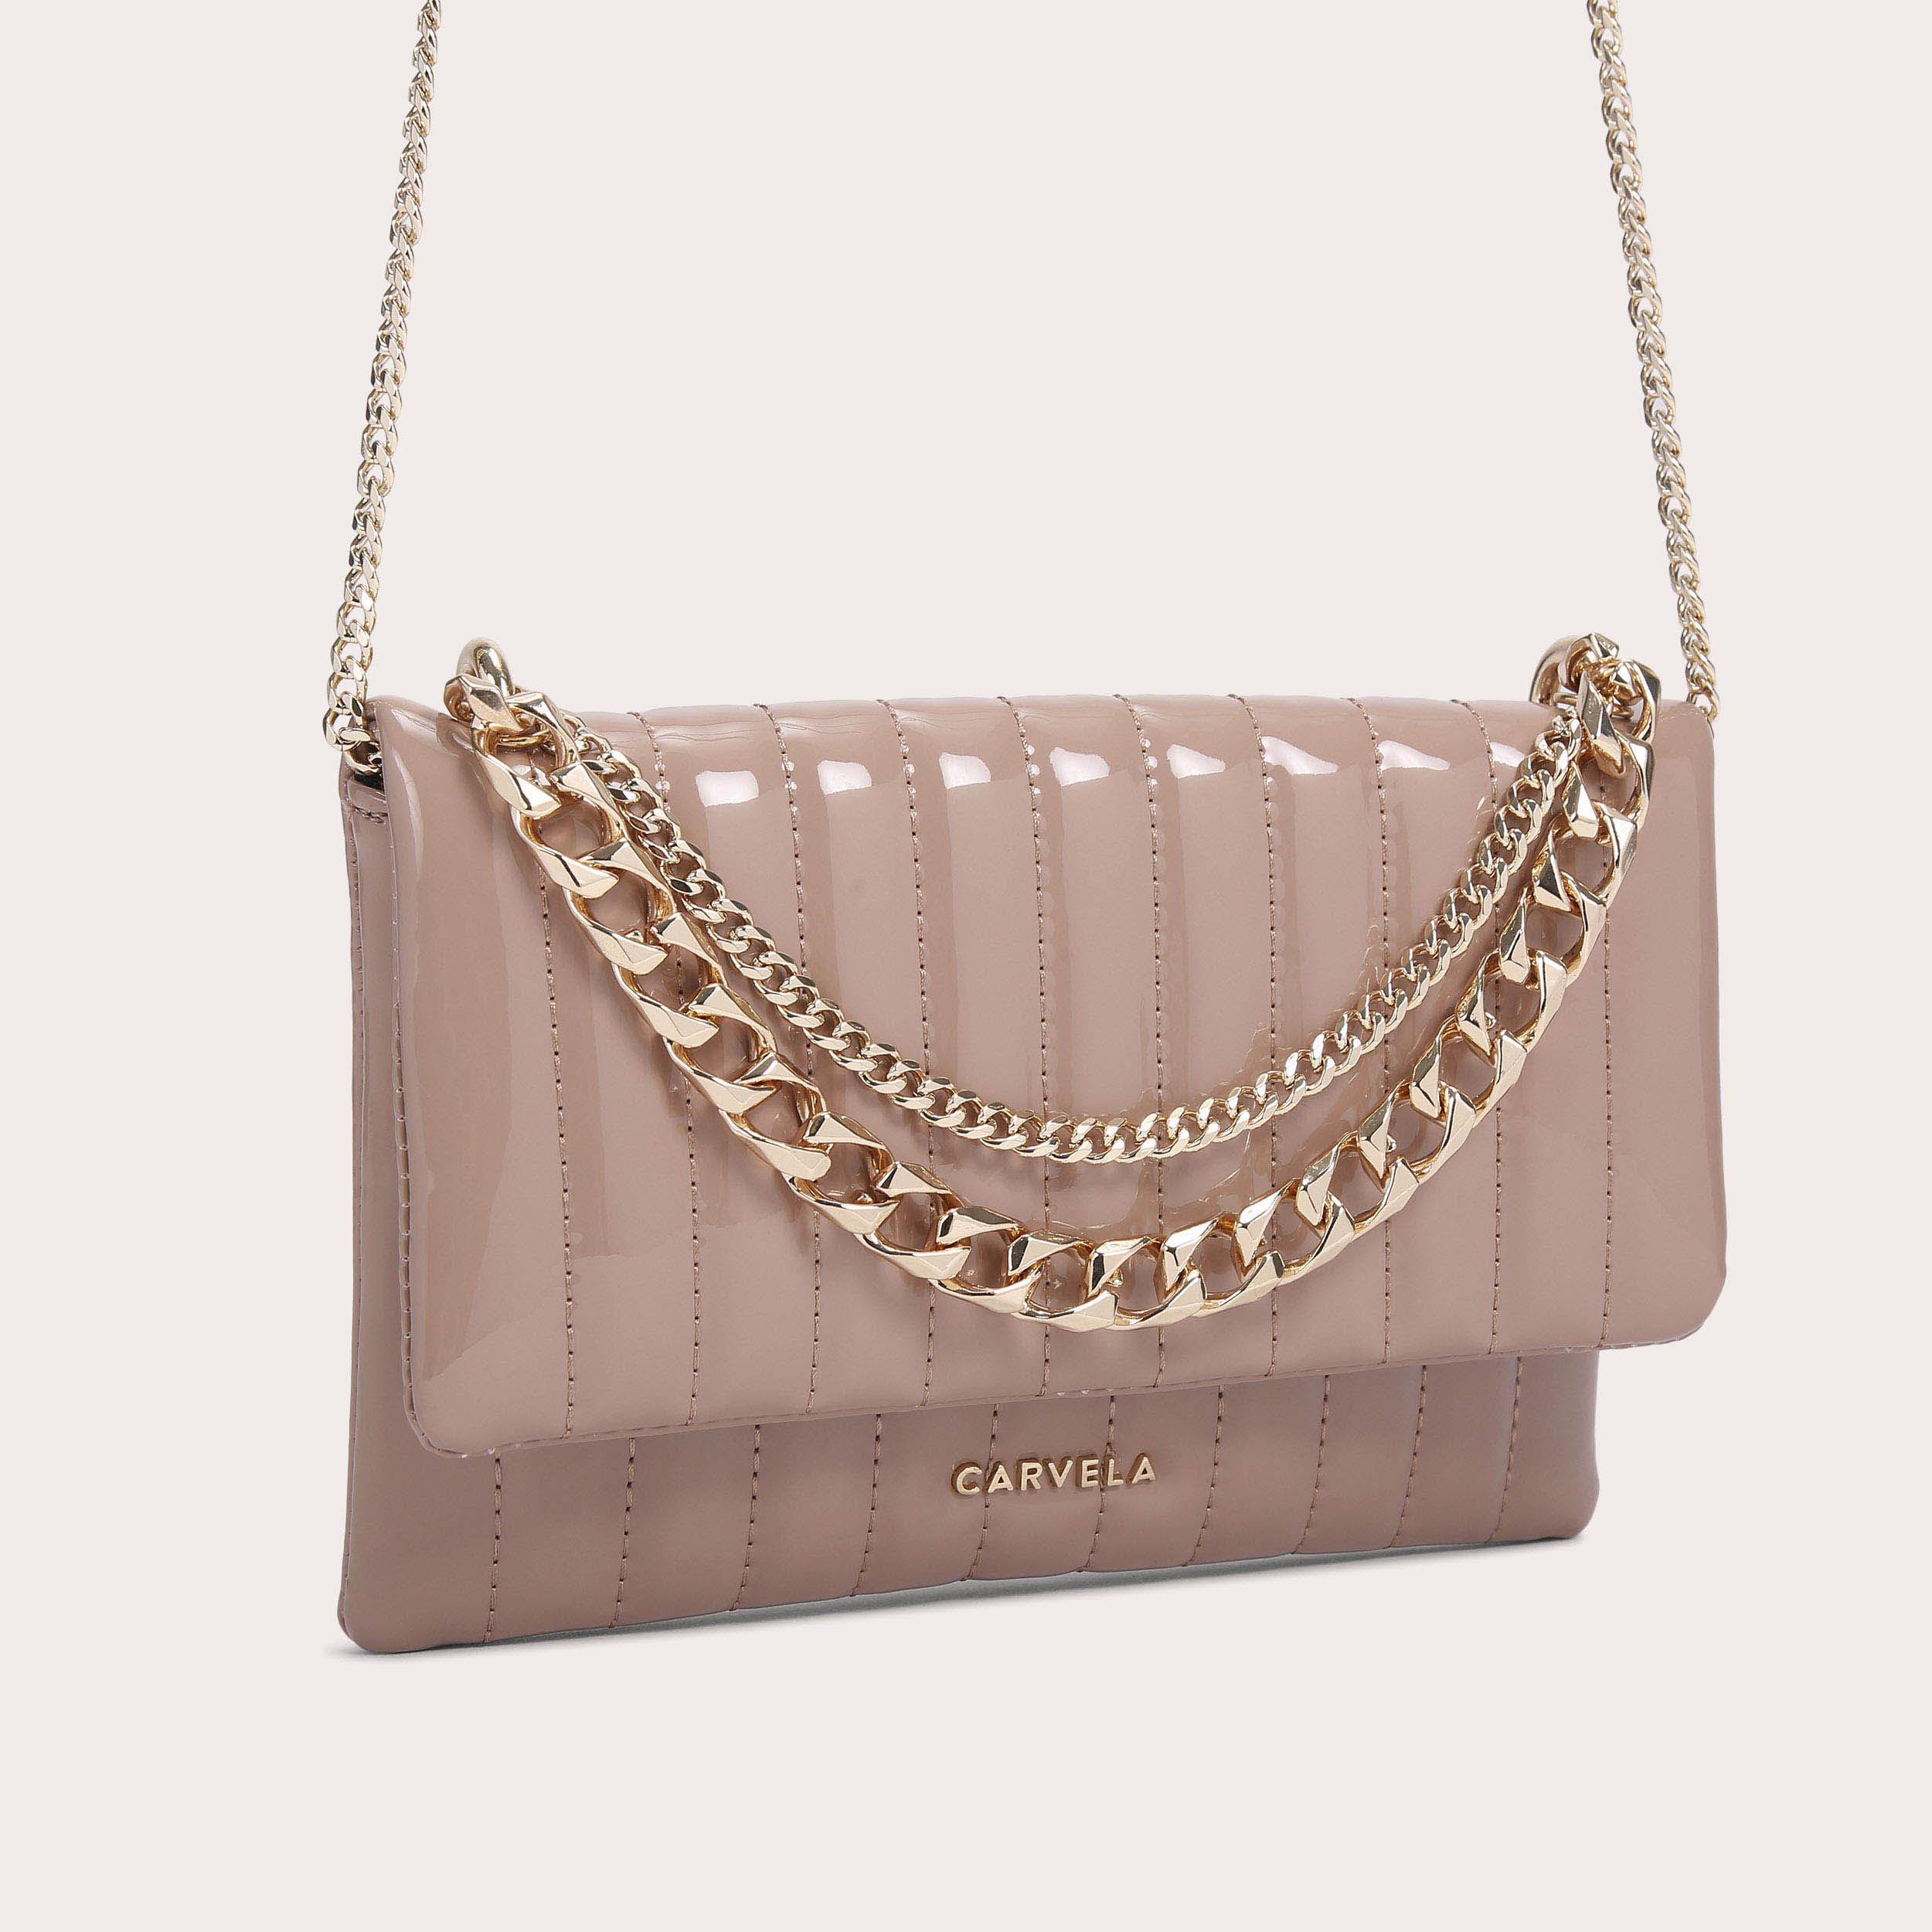 REBEL CLUTCH Blush Patent Quilted Cross Body Bag by CARVELA